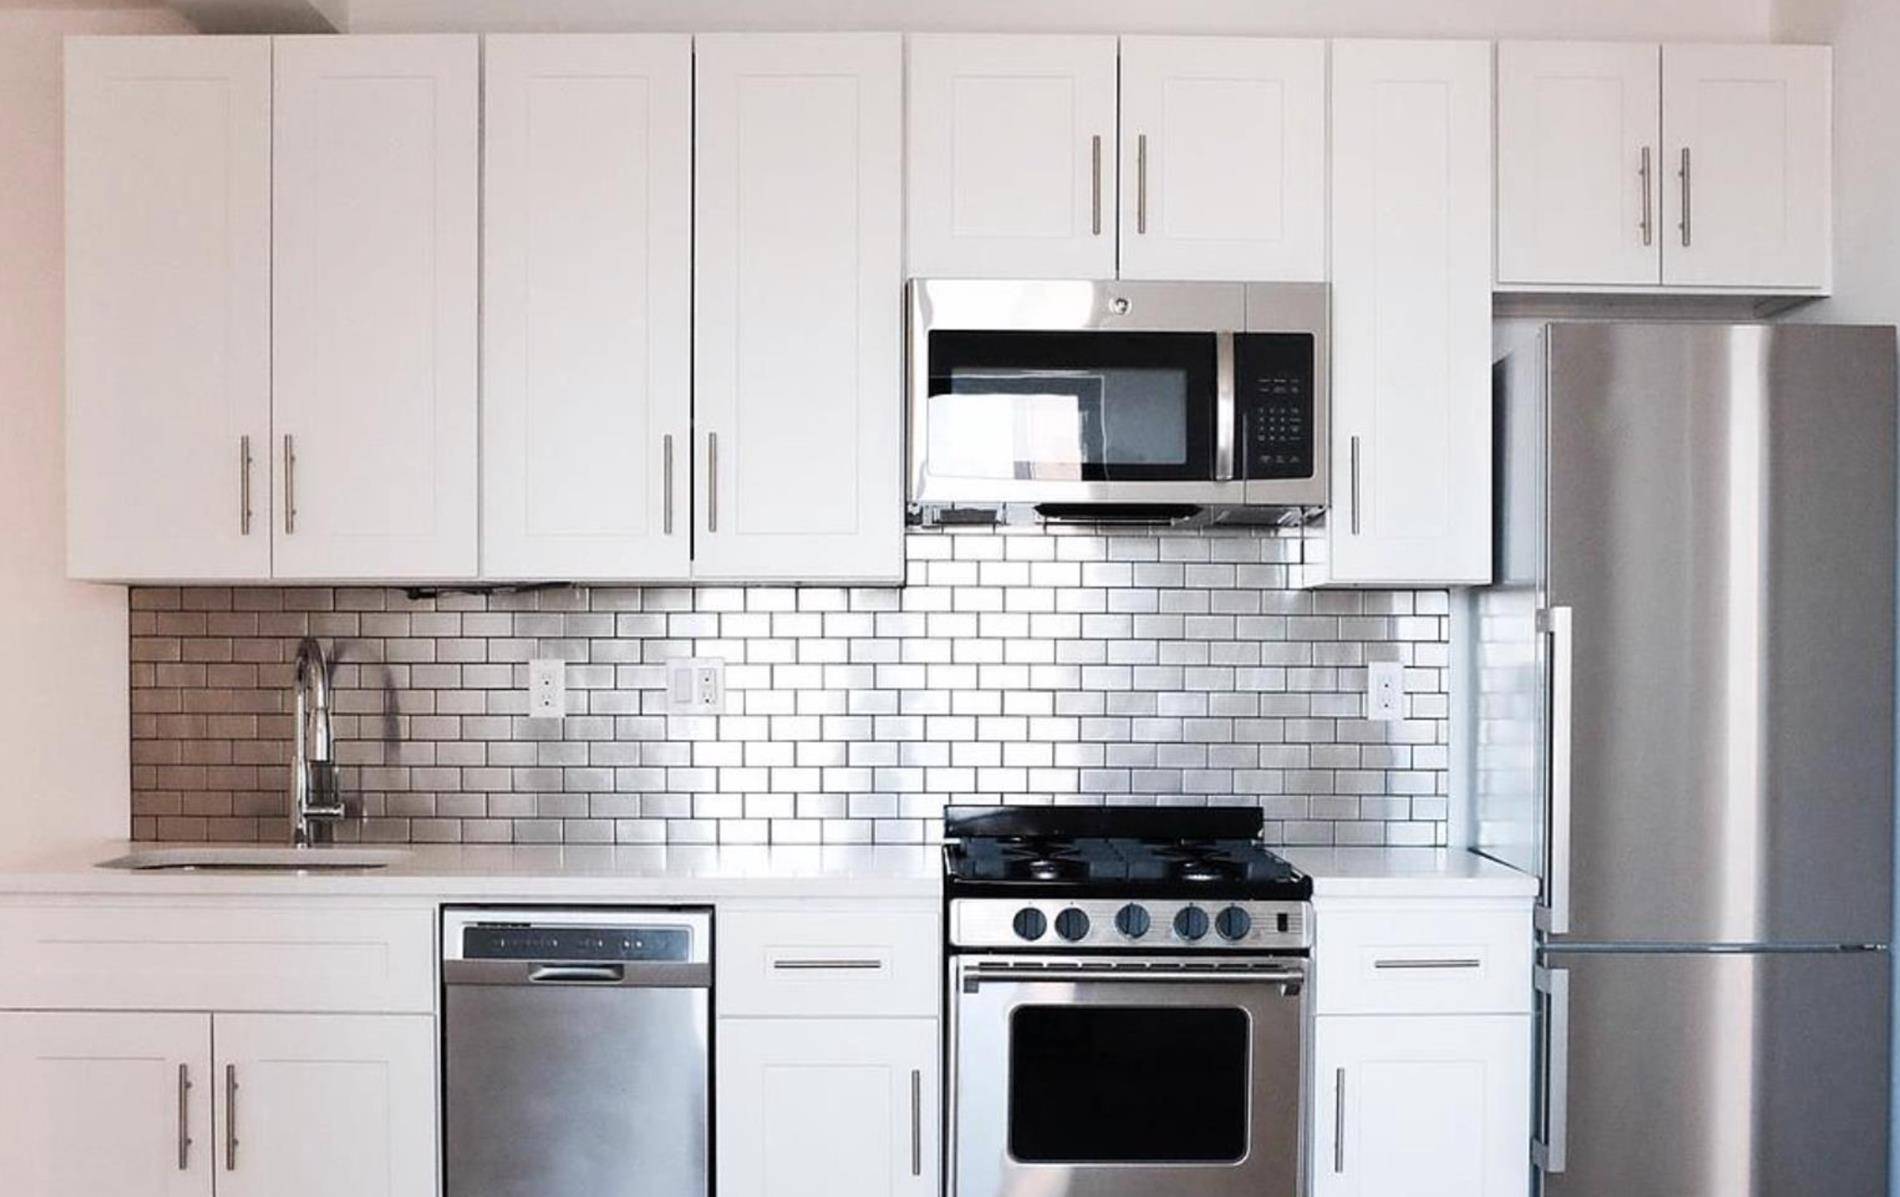 MUST 4 BEDROOM DUPLEX ! in unit washer and dryer stainless steel appliances custom cabinetry dishwasher microwave stone countertopsPrime South Park Slope apartment featuring bleached plank floors, custom lacquer white ...